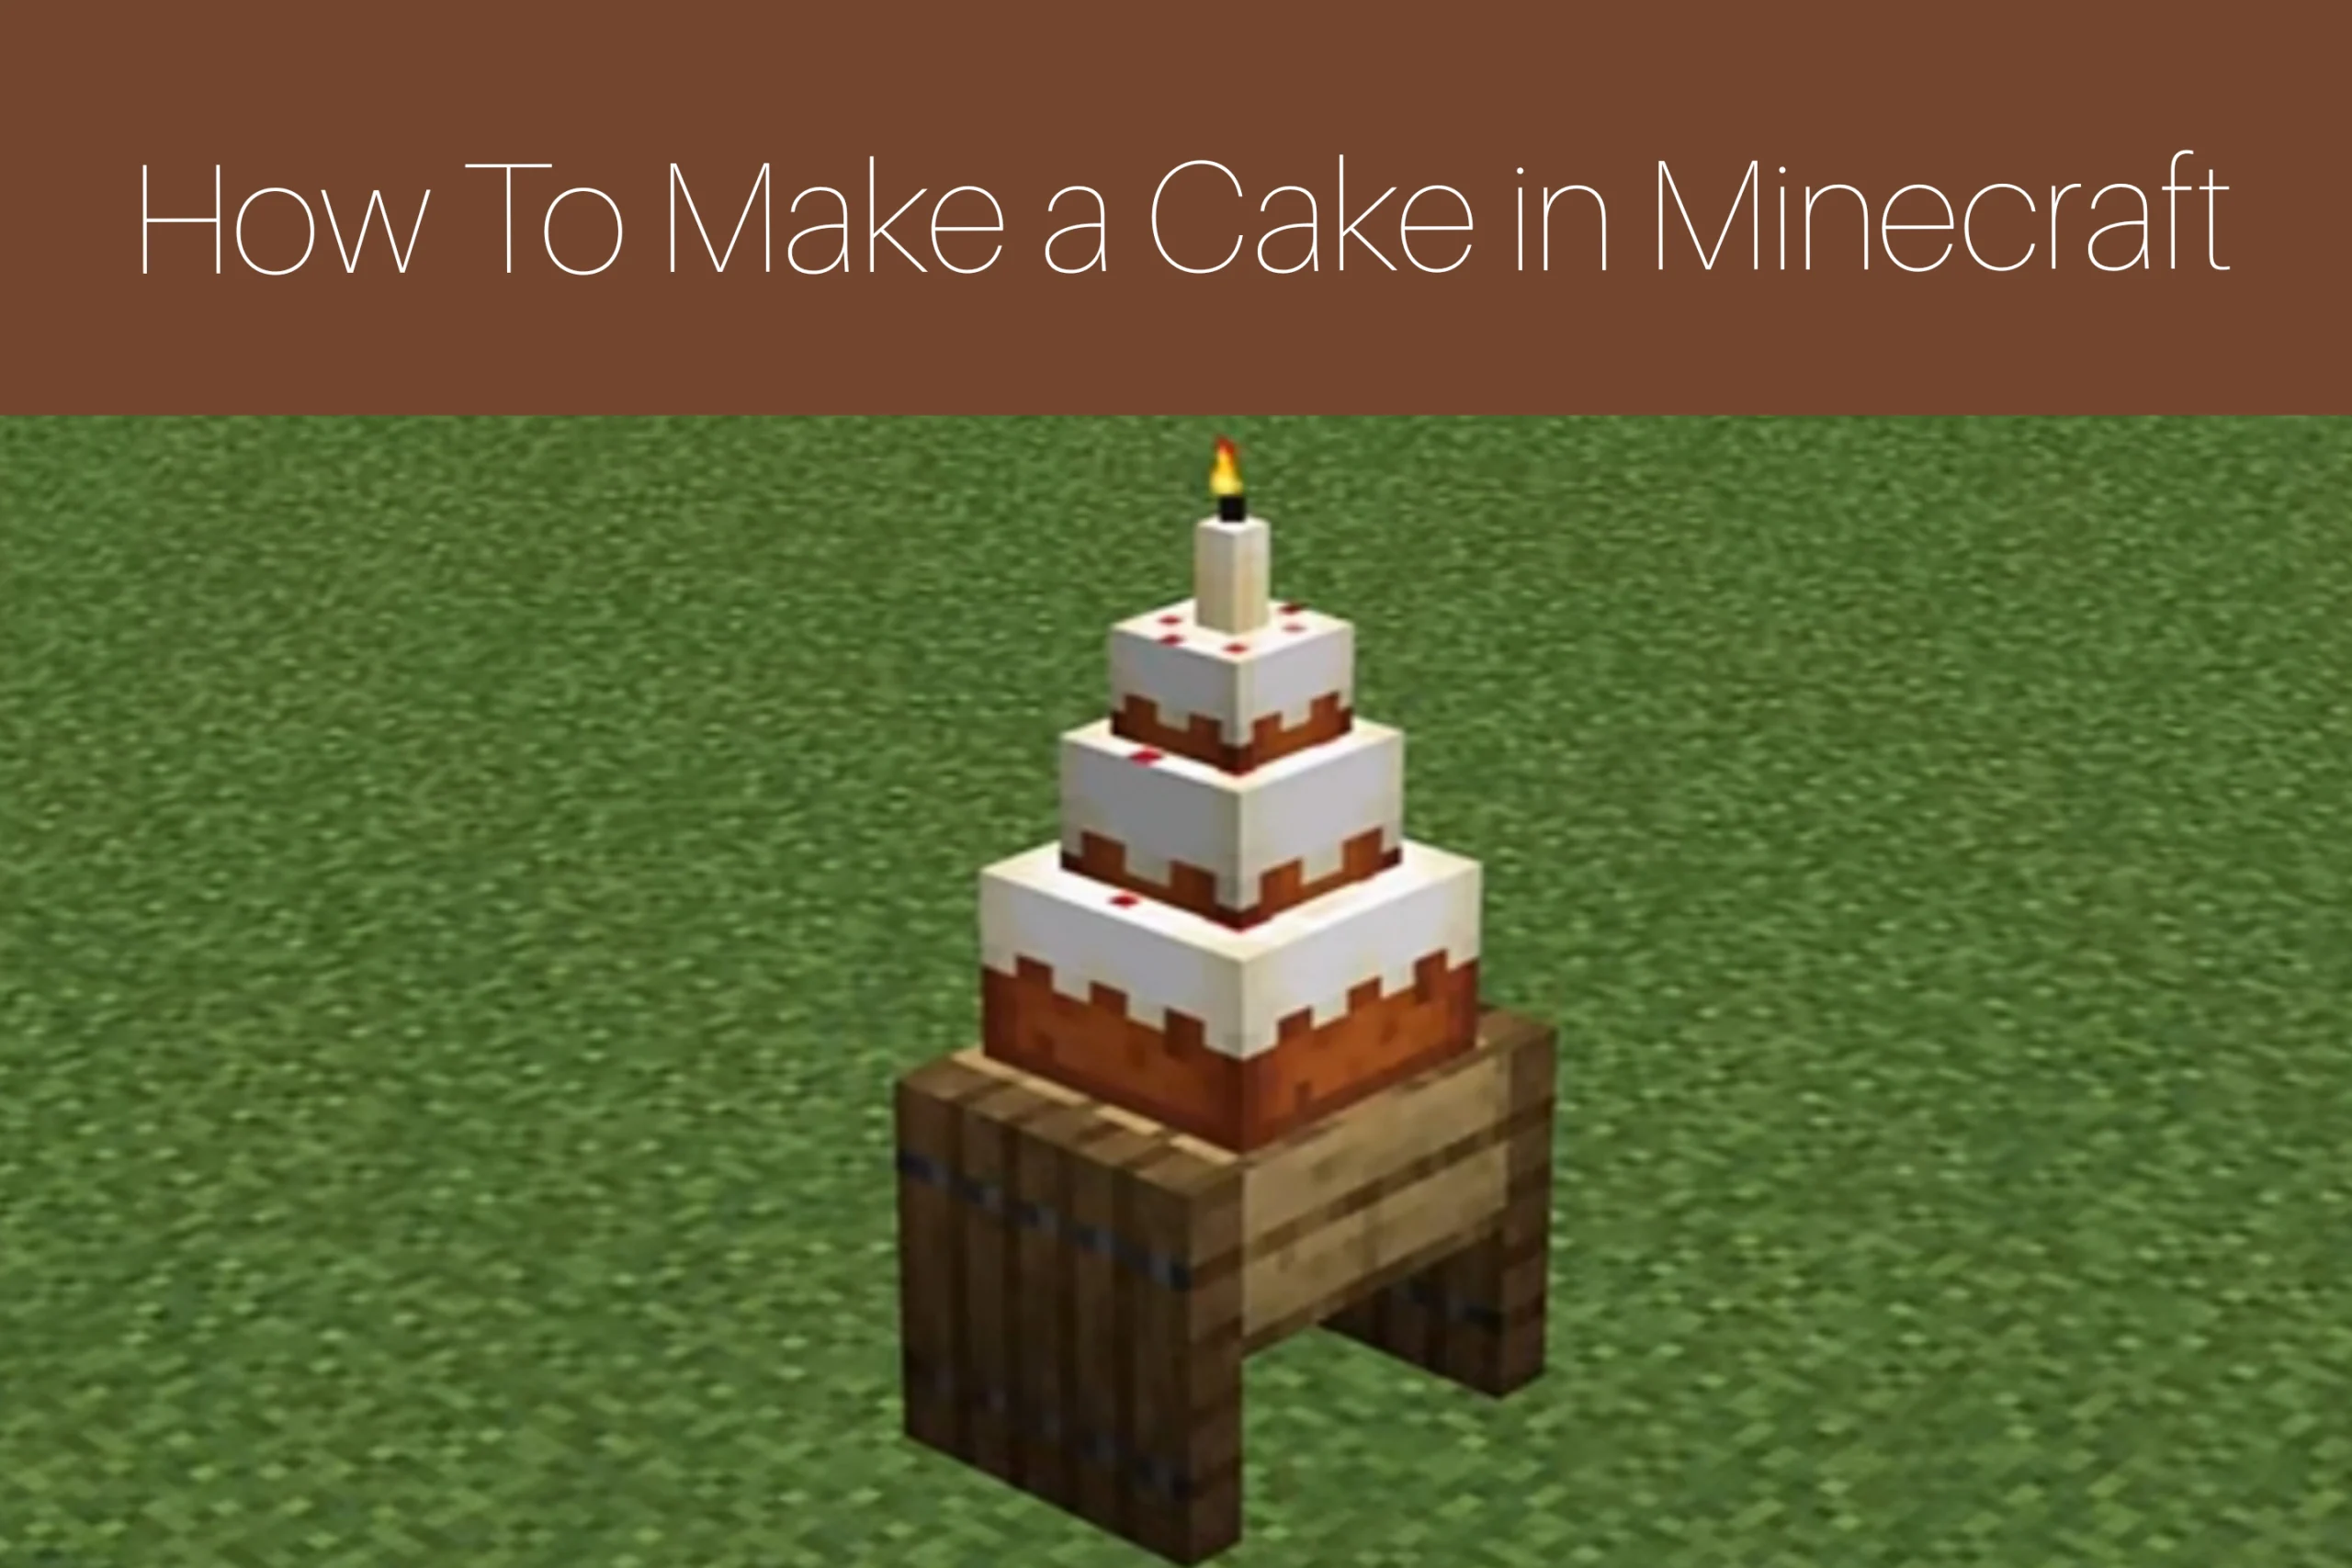 How To Make a Cake In Minecraft